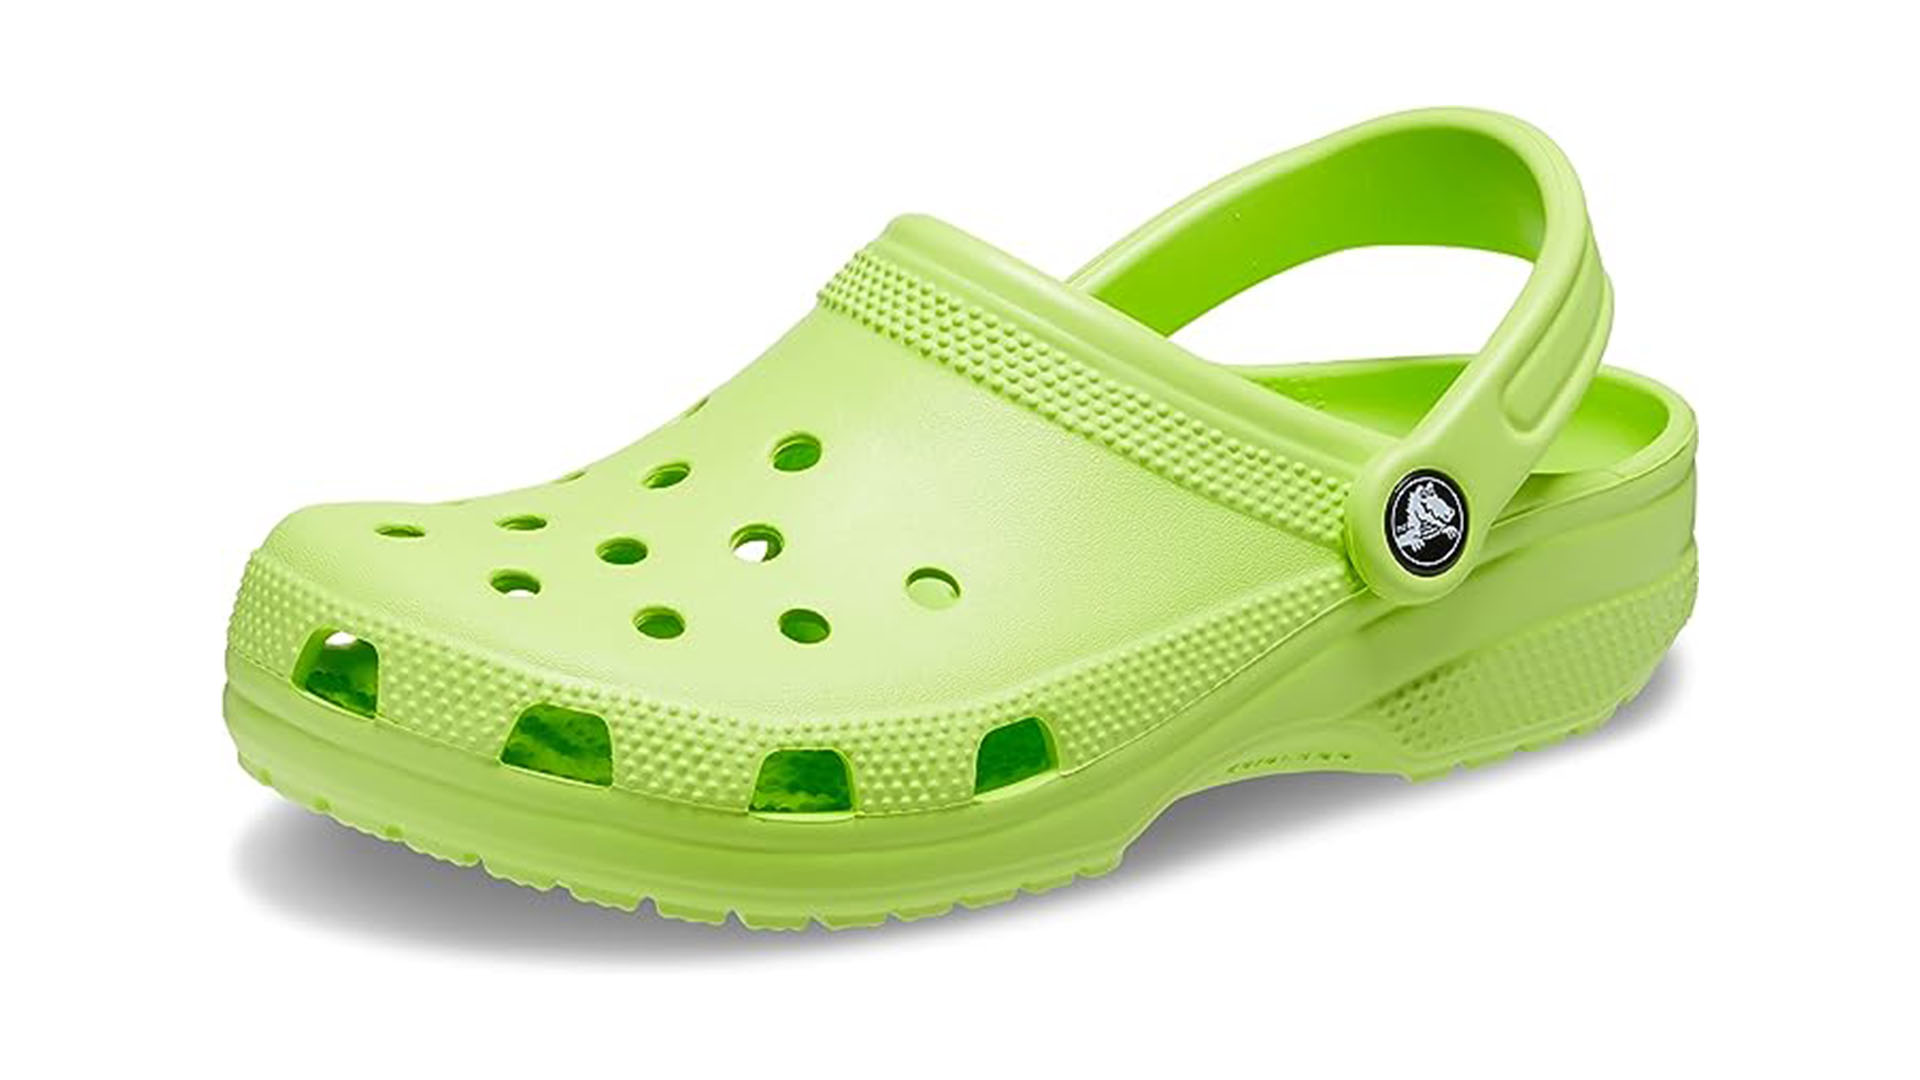 Shrek Crocs are officially real